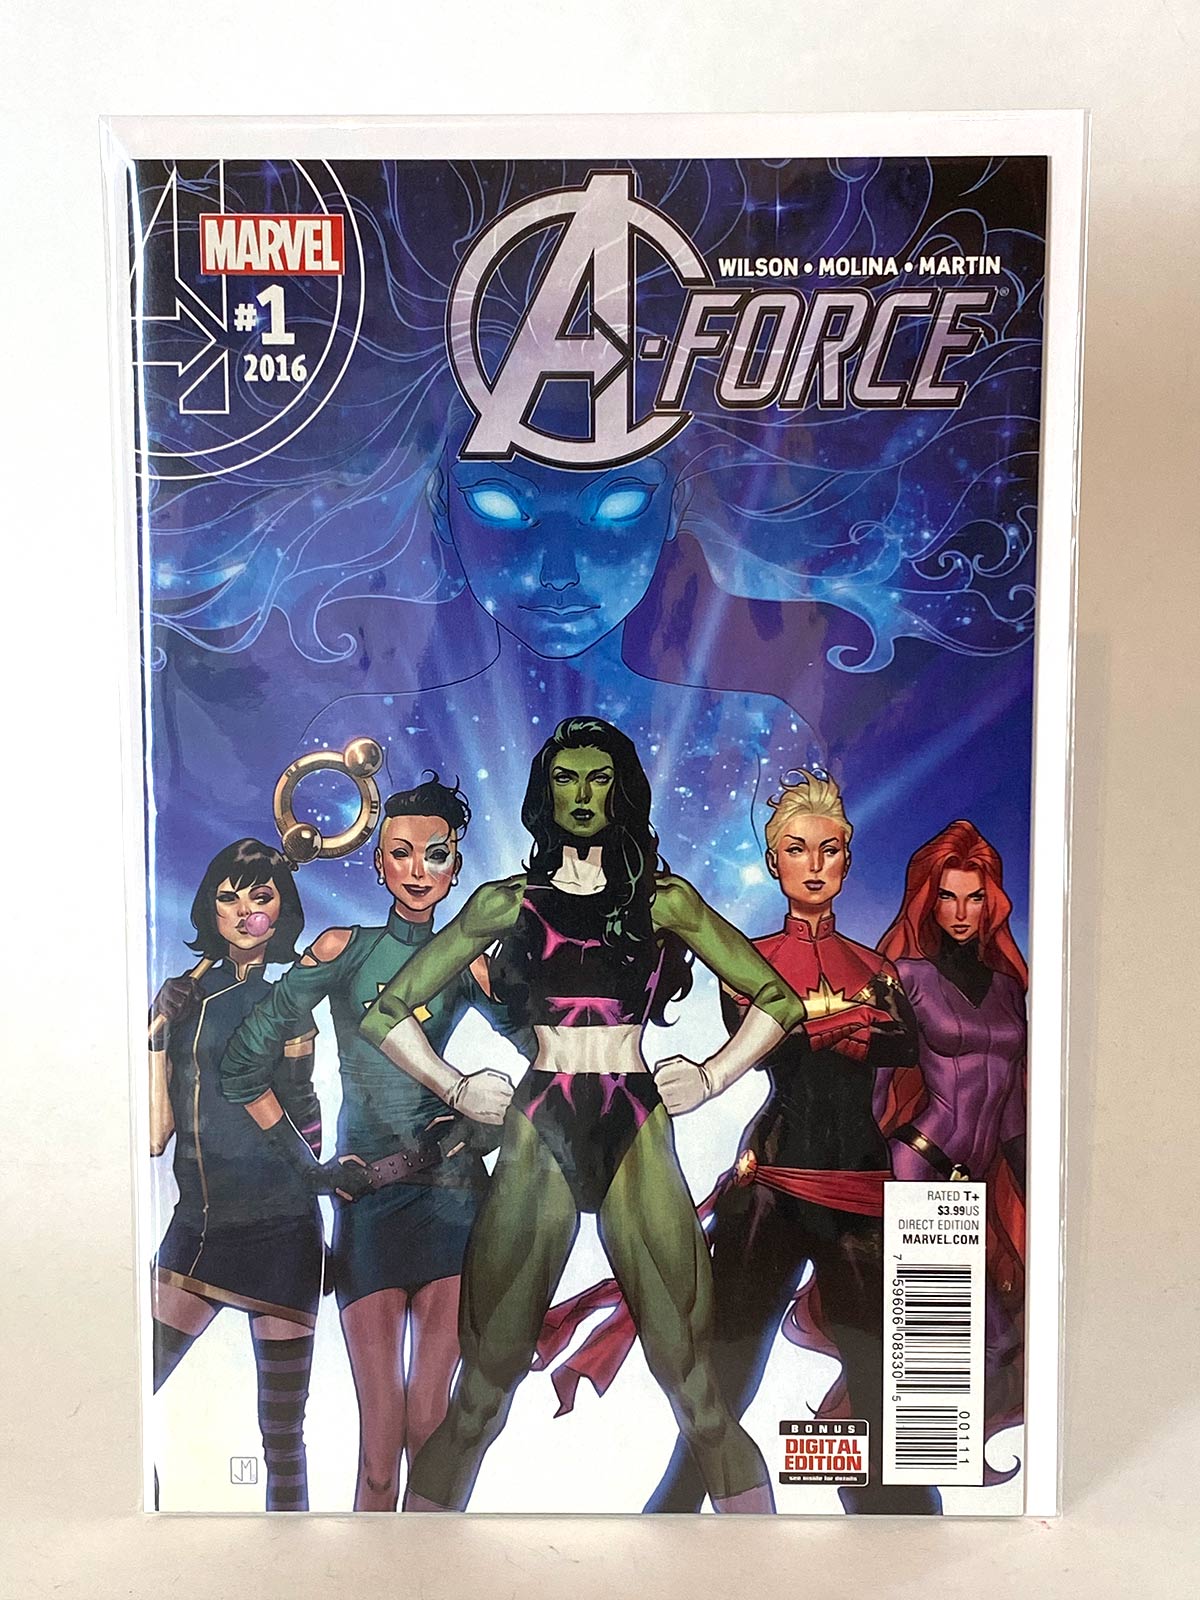 A-Force, Vol. 2 by Kelly Thompson